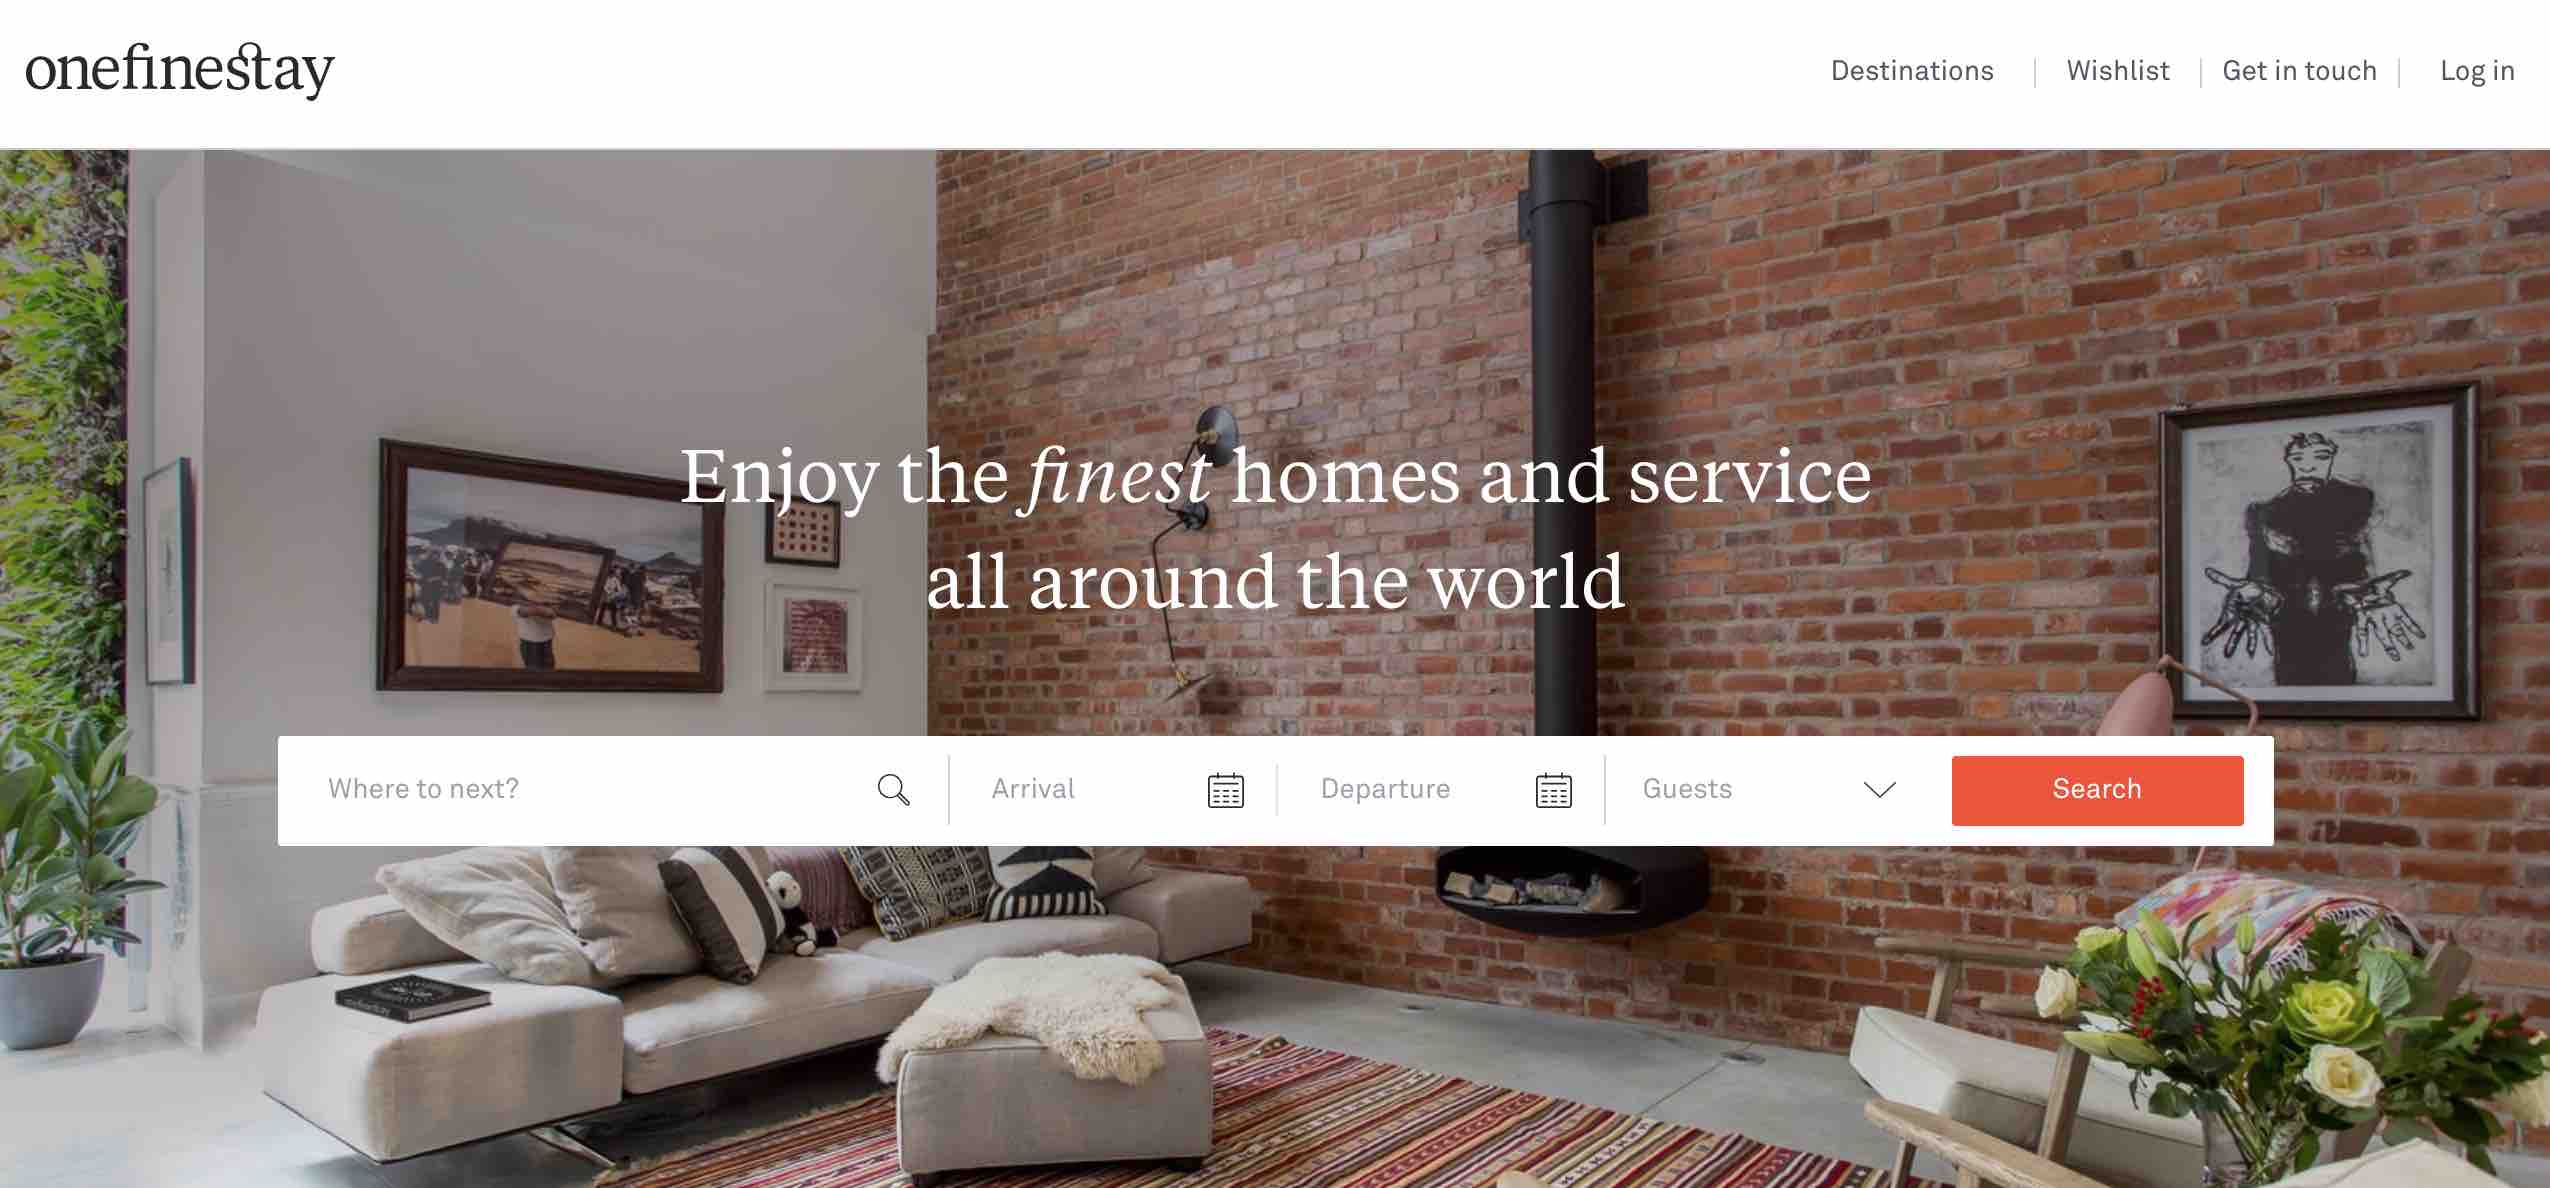 OneFineStay - Rental Sites Similar to Airbnb